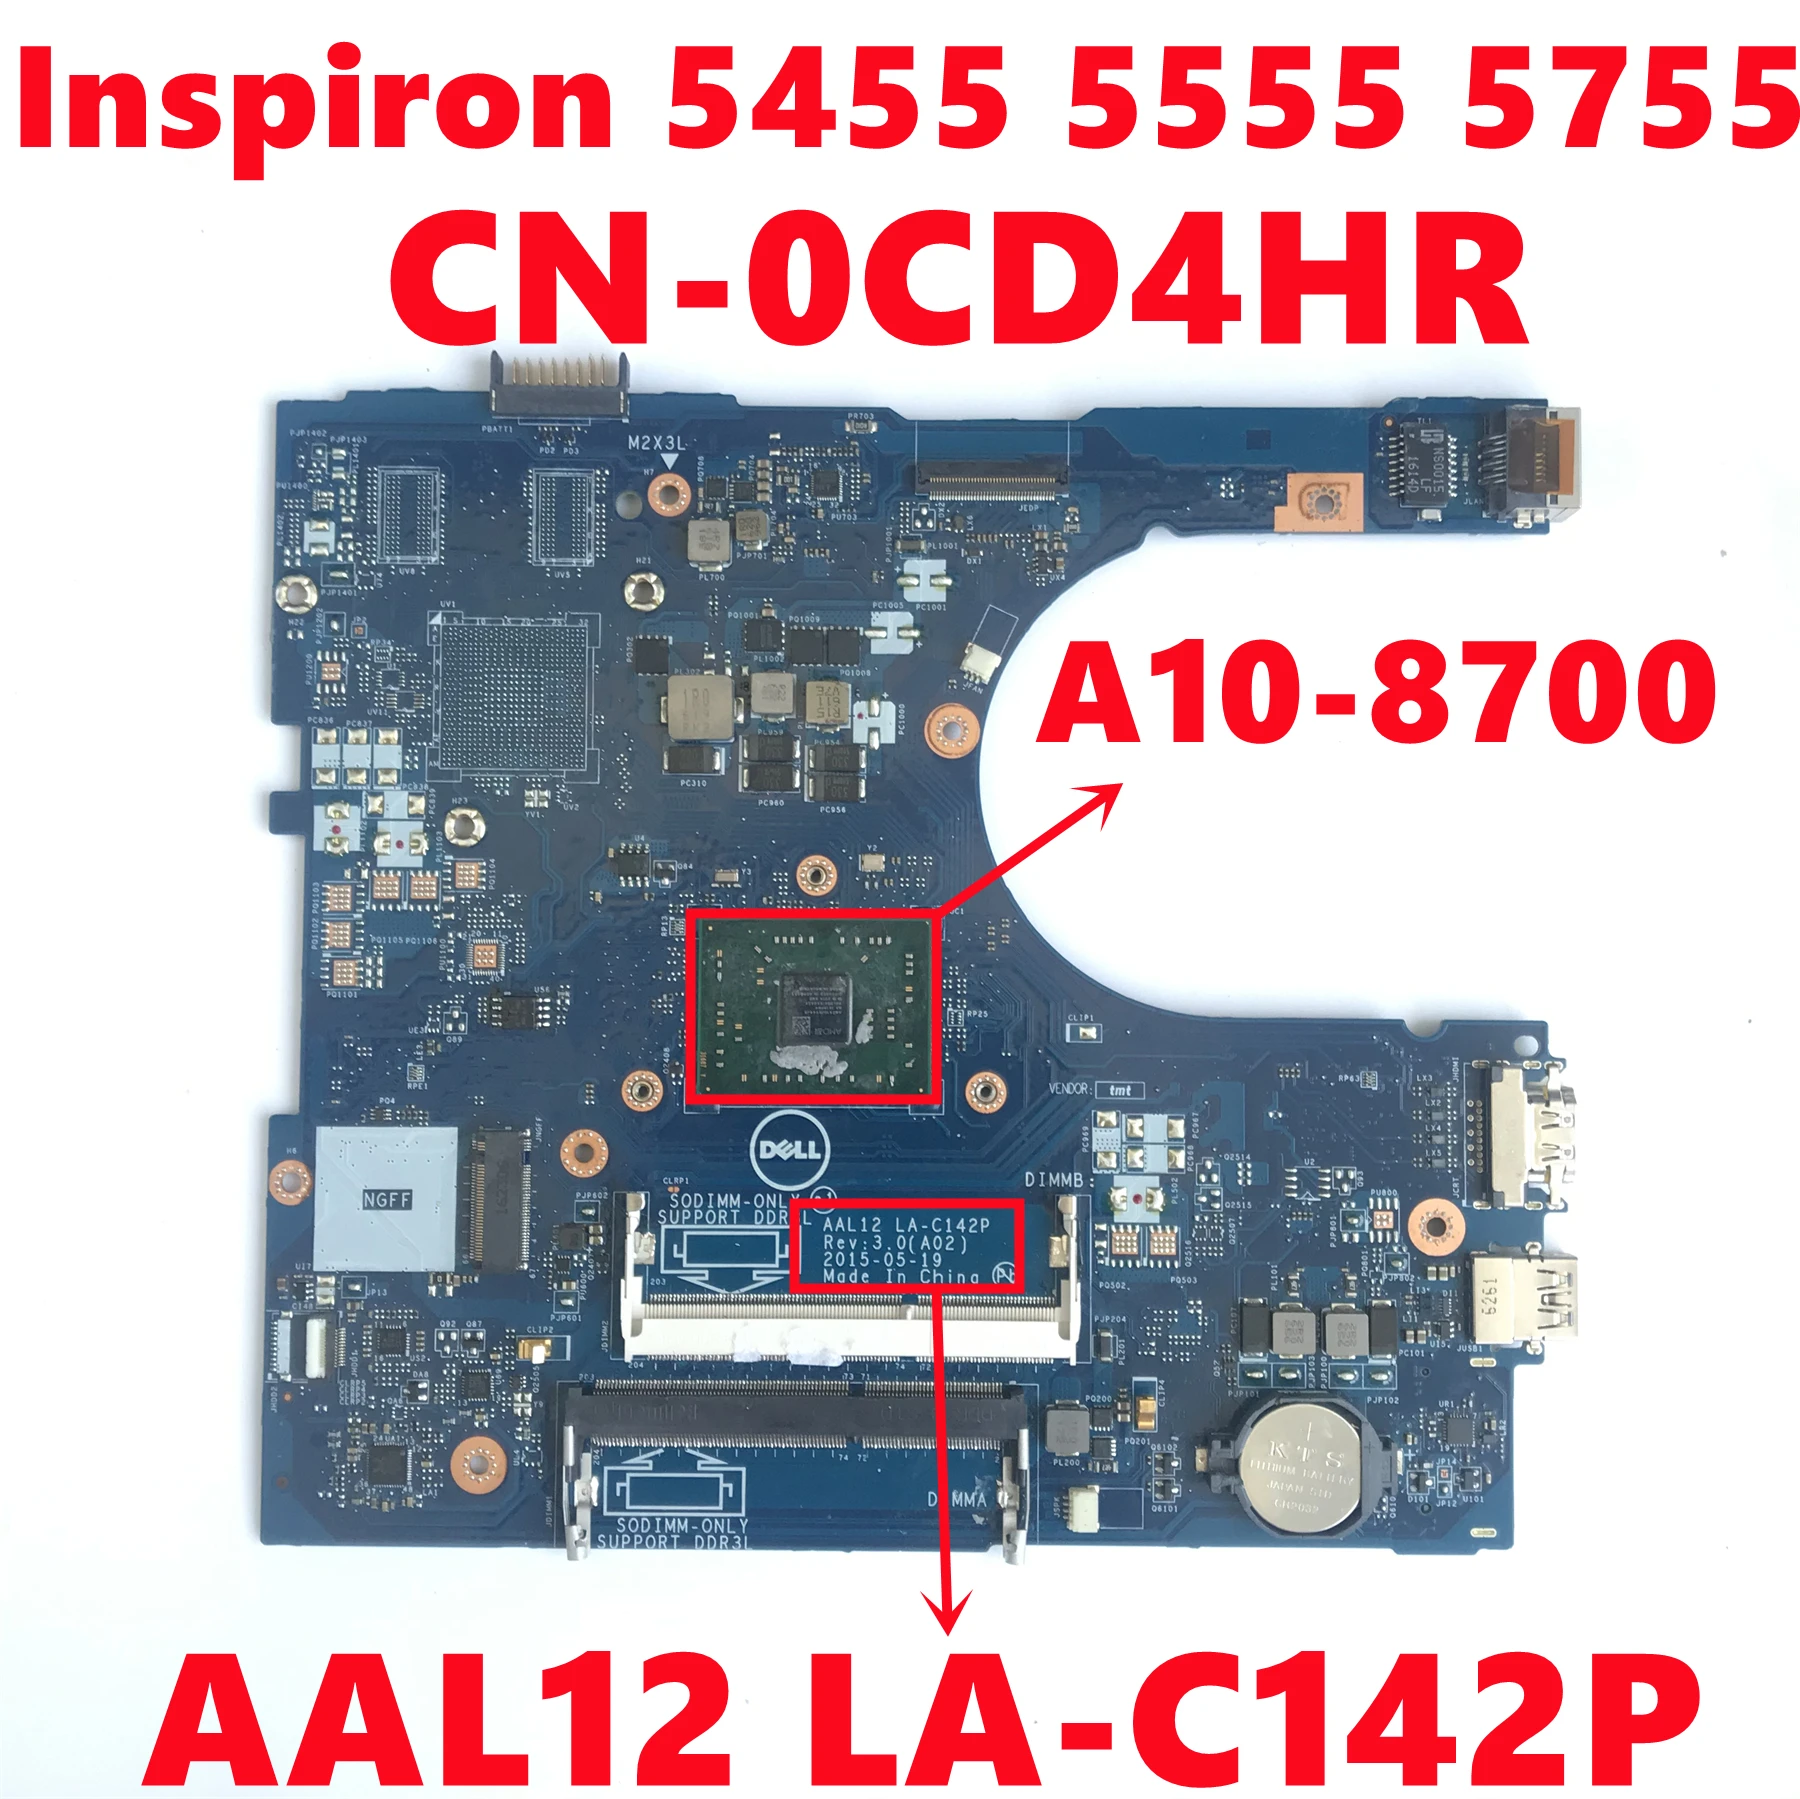 

CN-0CD4HR 0CD4HR CD4HR For Dell Inspiron 5455 5555 5755 Laptop Motherboard AAL12 LA-C142P With A10-8700 CPU 100% Fully Tested OK